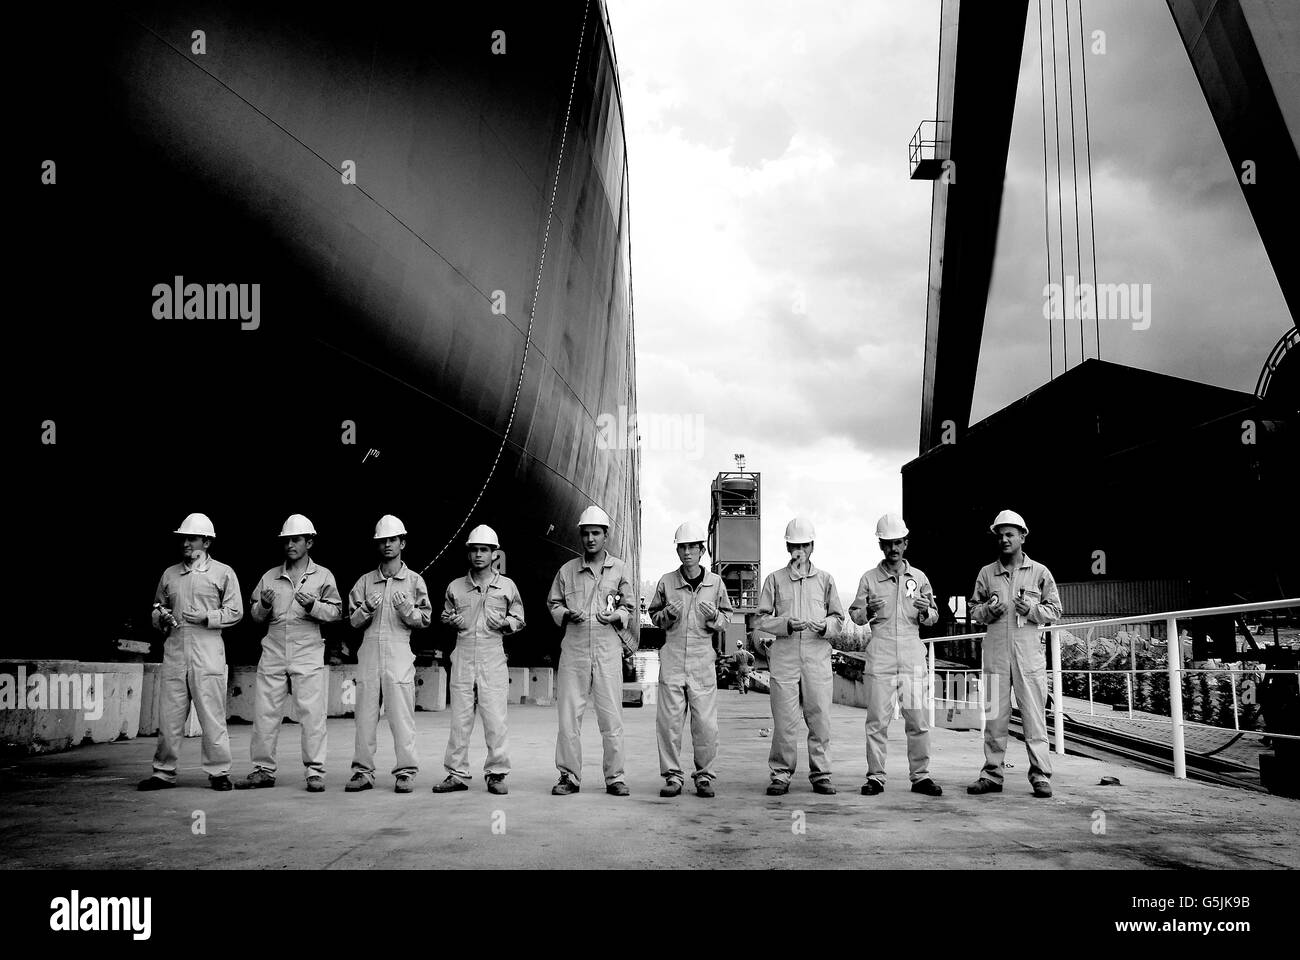 Workers praying for ship which is already finished for voyage. Stock Photo